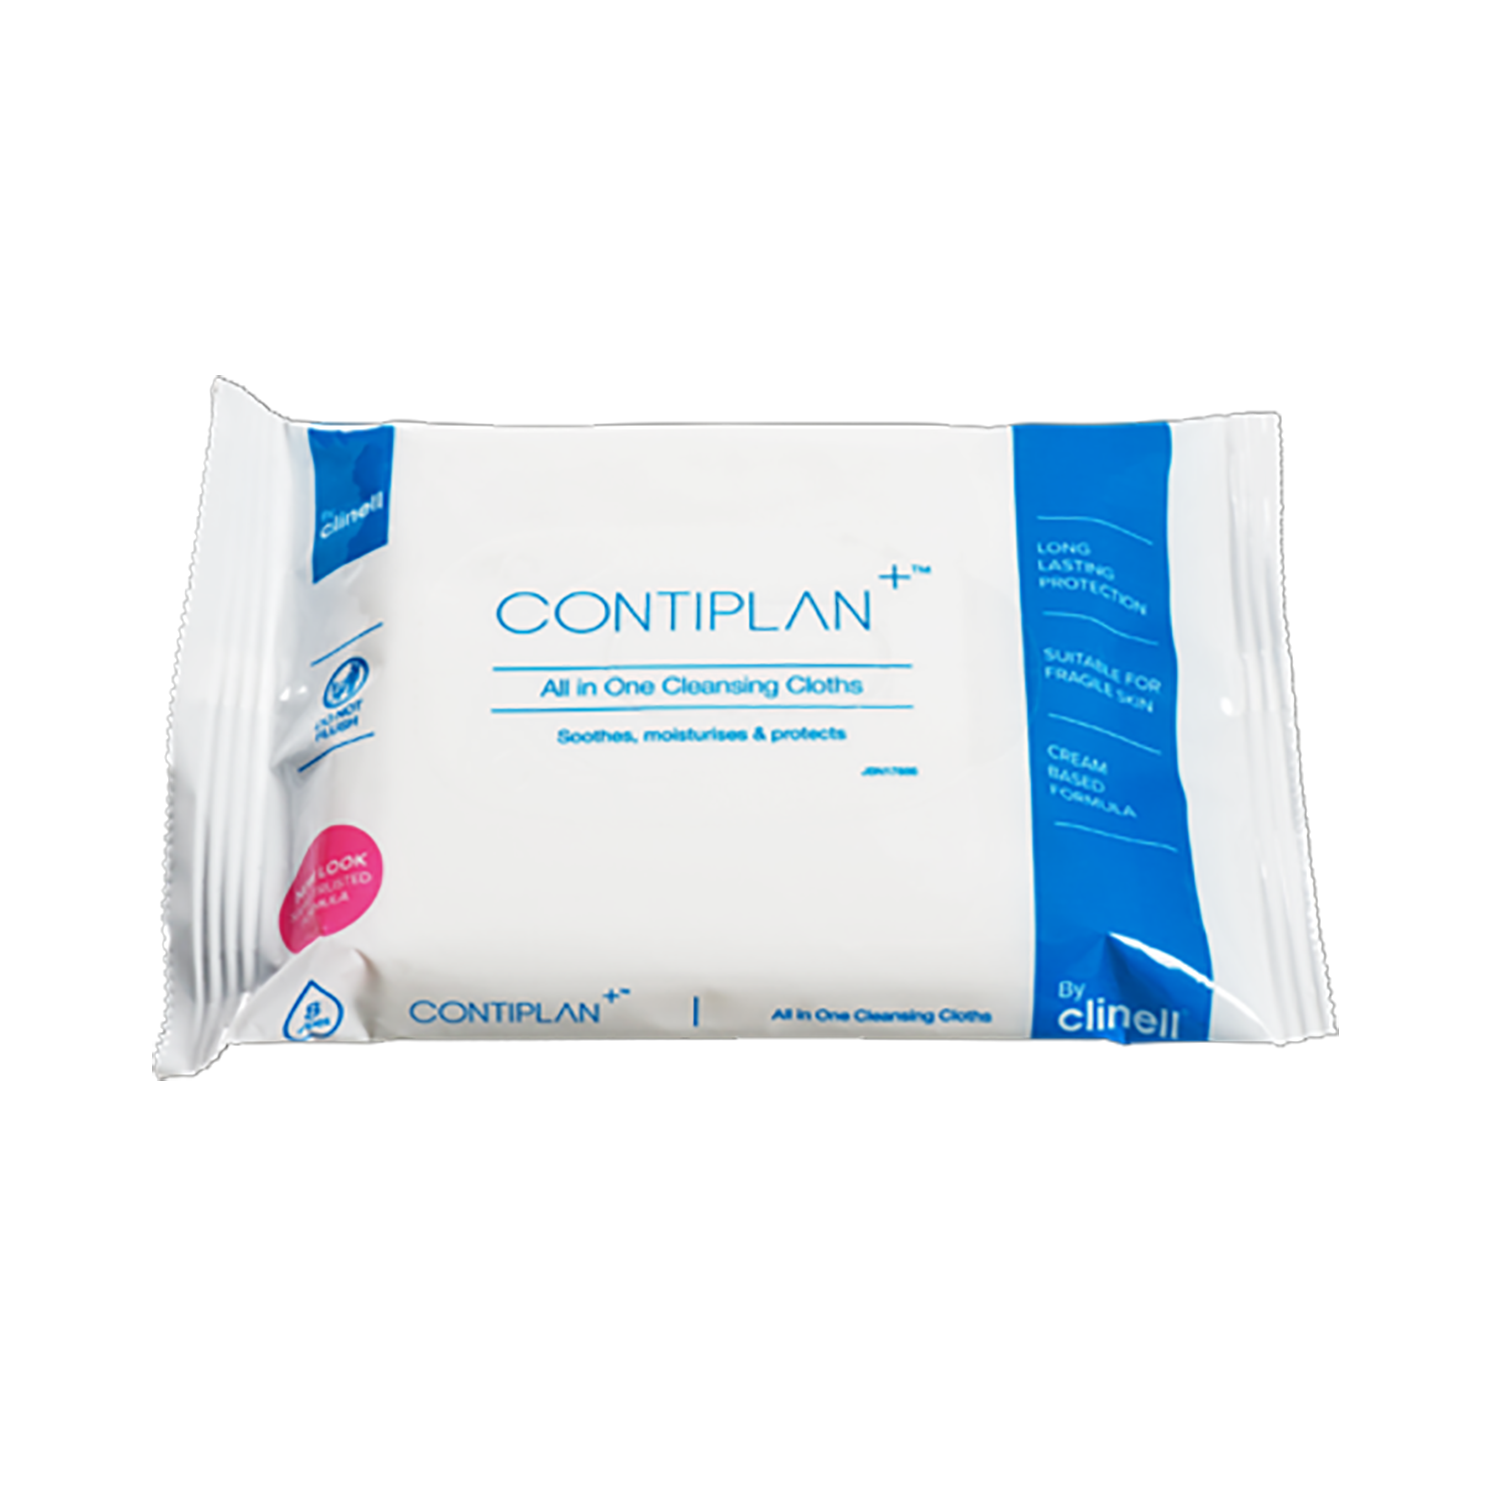 Clinell Contiplan+ All-in-One Cleansing Cloths | Pack of 8 | Short Expiry Date